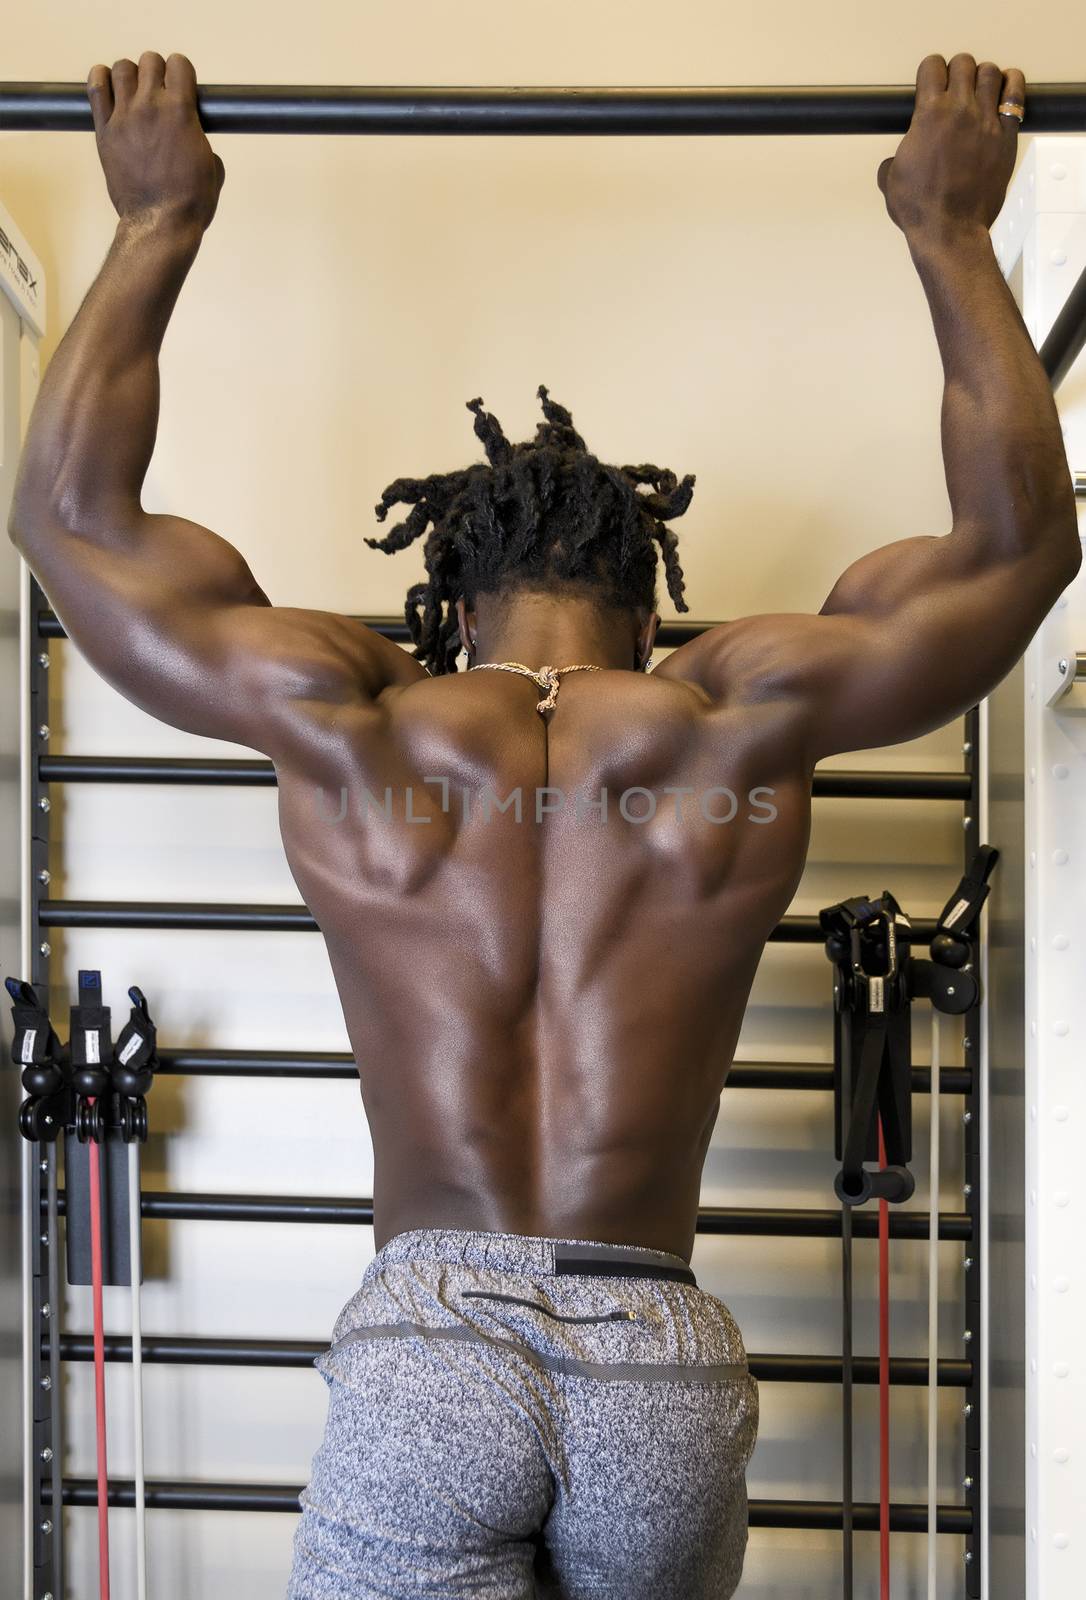 Bodybuilder Doing Pull-ups in the Gym by whitechild